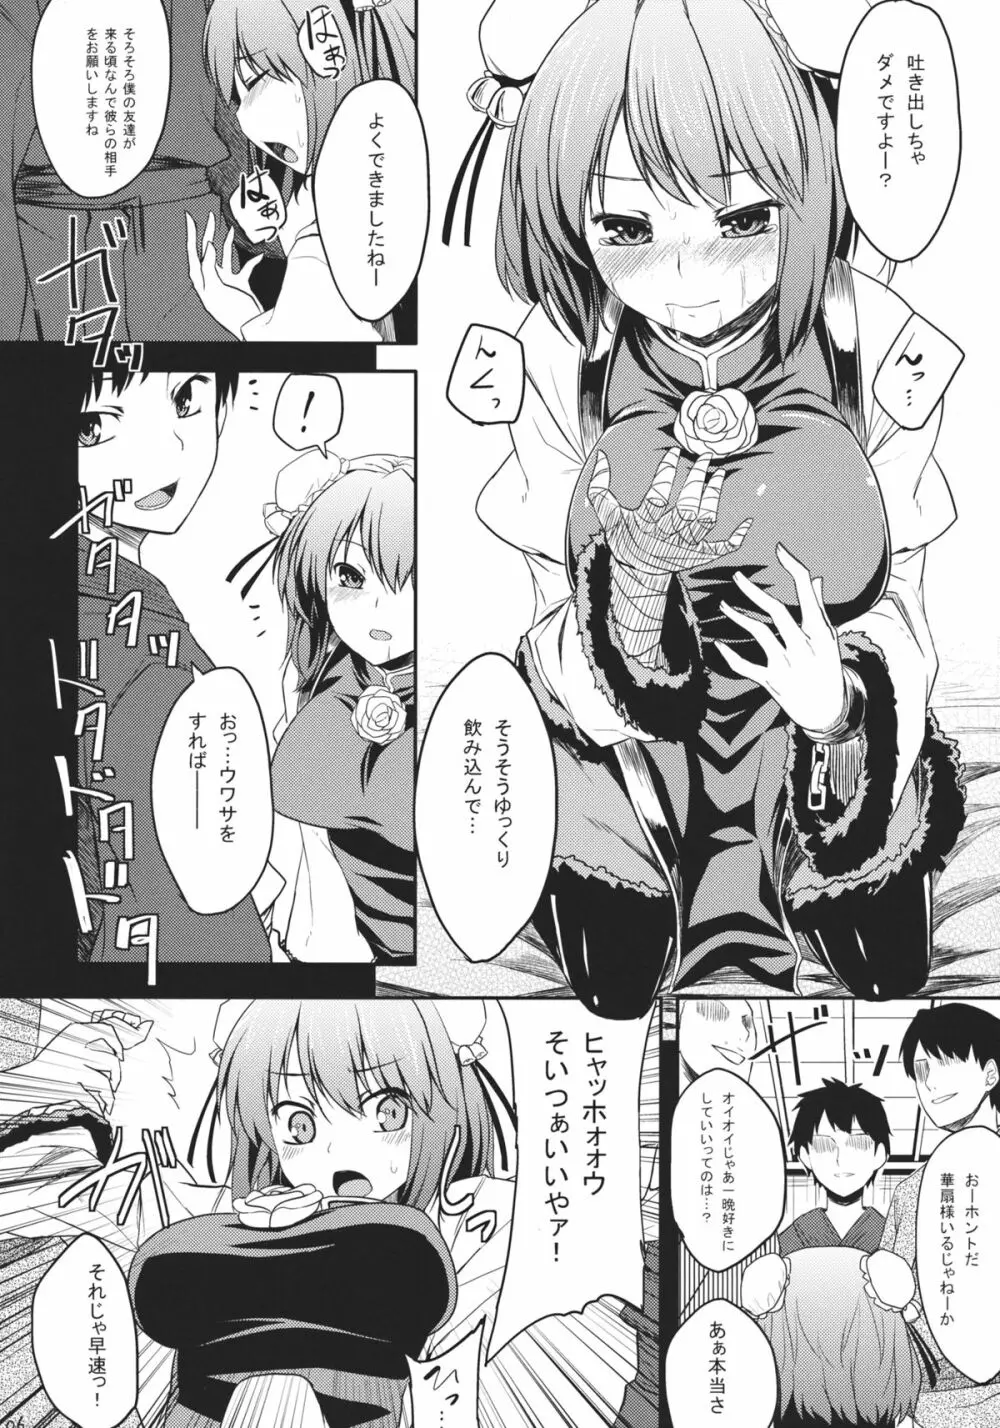 How to くりすます？ - page6